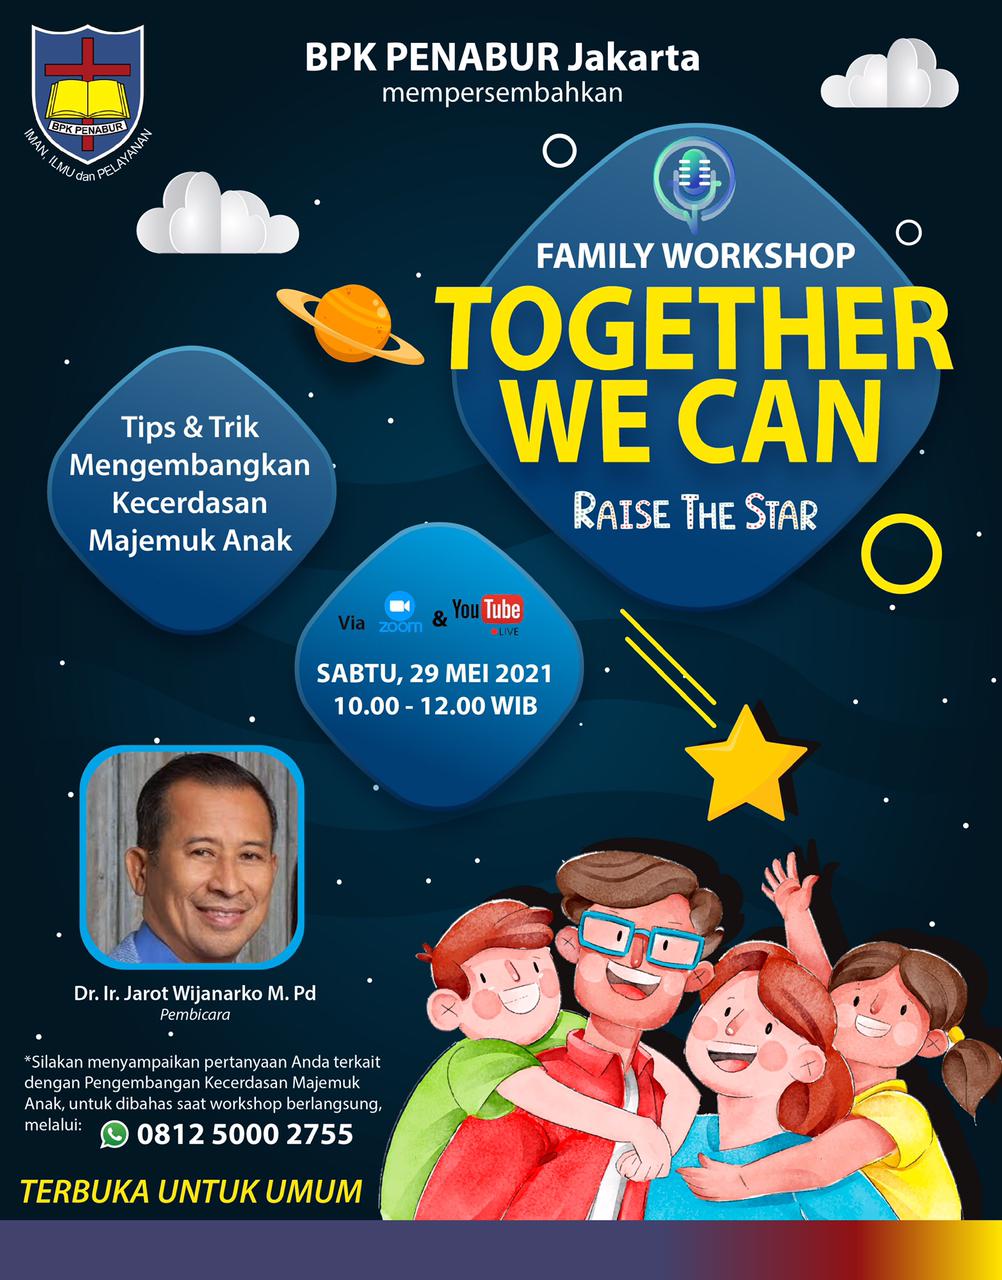 "Together We can Raise the Star" - Family Workshop